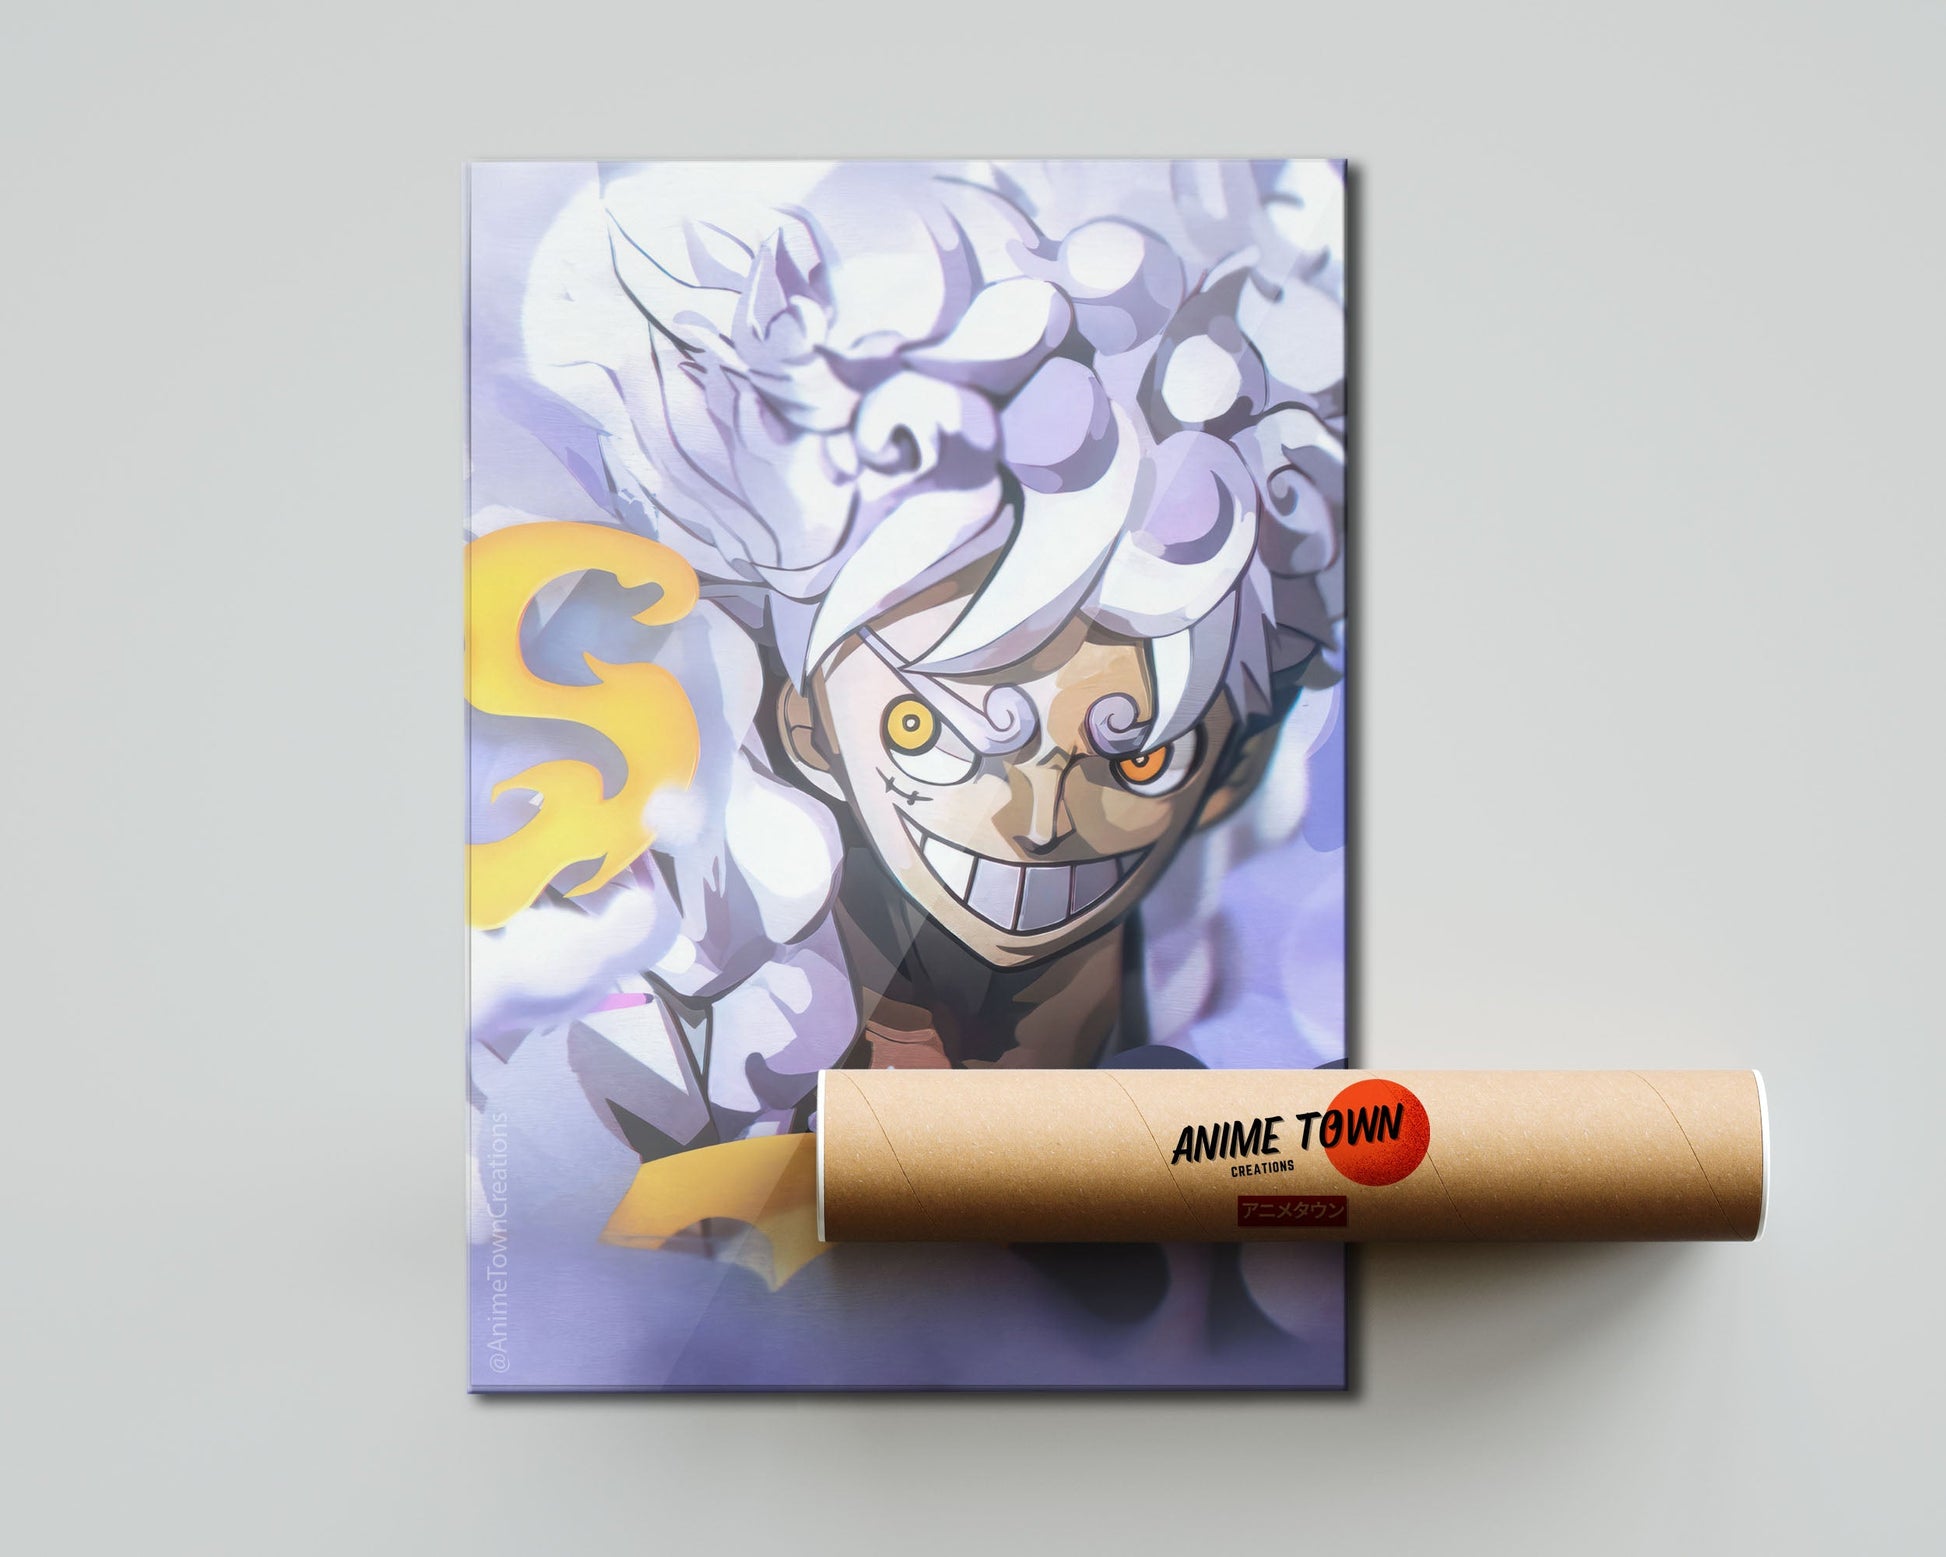 Anime Town Creations Poster One Piece Luffy Gear 5 White 5" x 7" Home Goods - Anime One Piece Poster